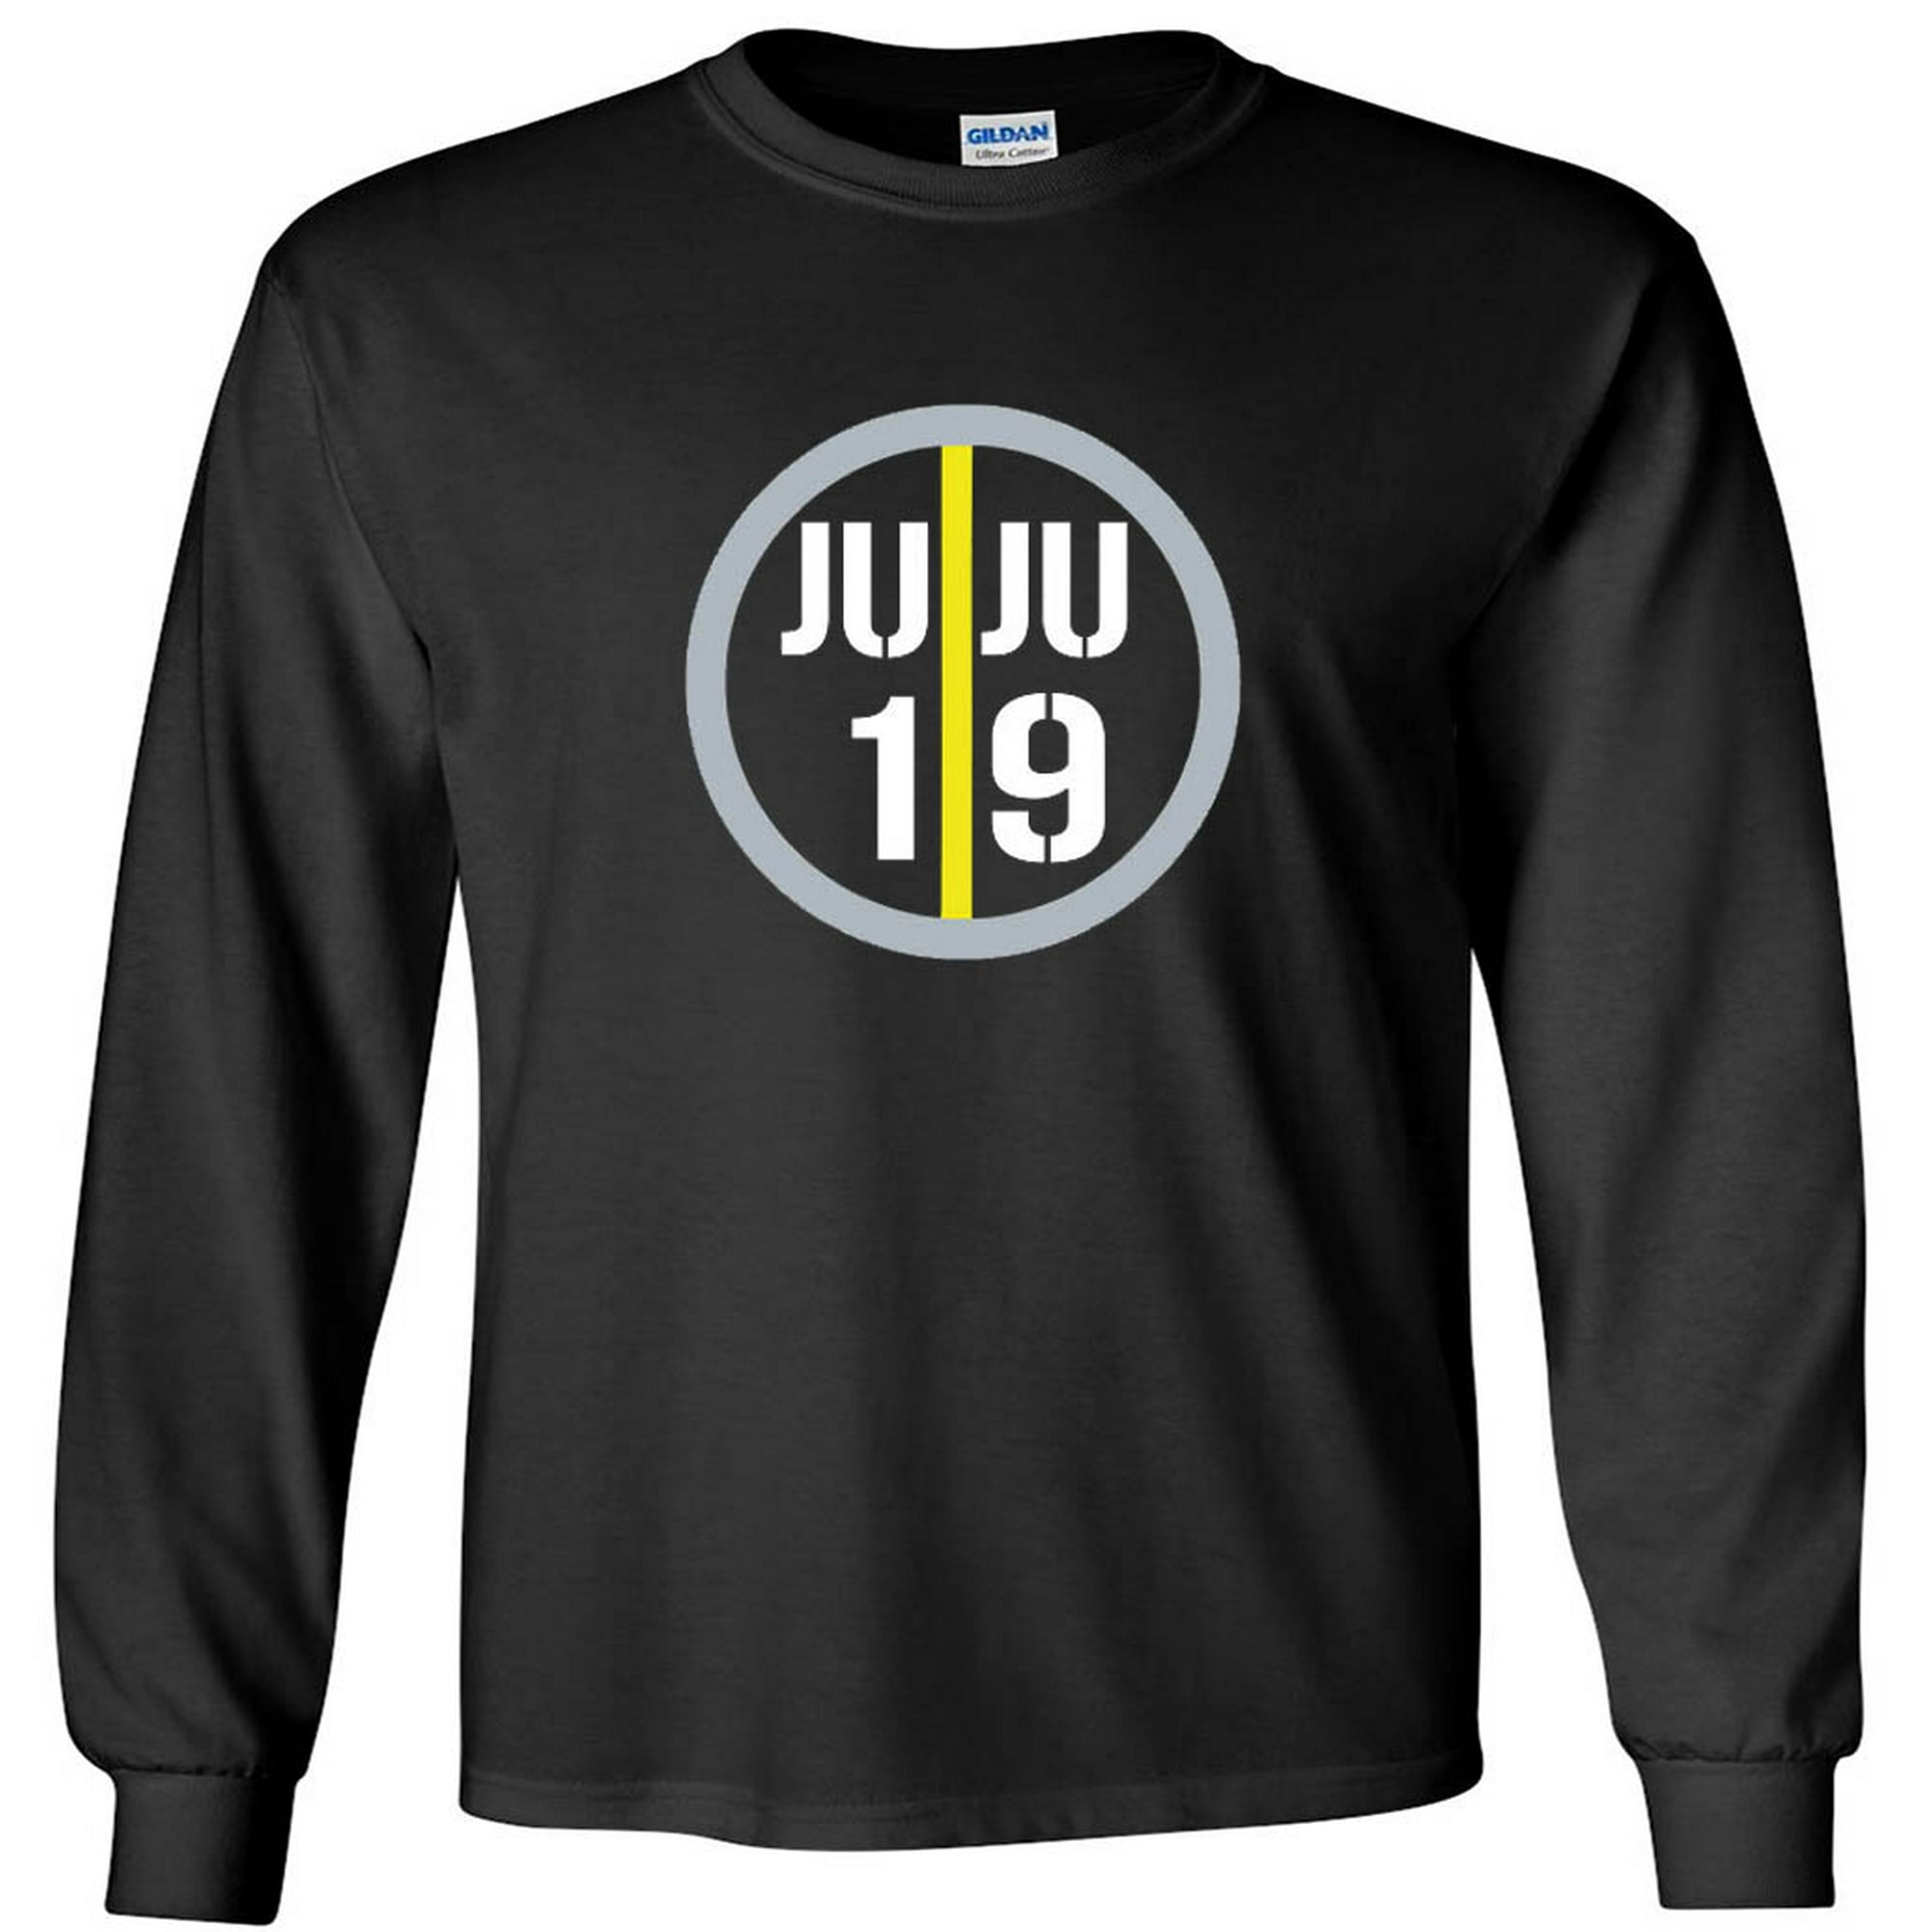 Shedd Shirts Long Sleeve Black Steelers Juju Smith Schuster Logo T-Shirt Youth Small, Boy's, Size: Youth Small(6-8)